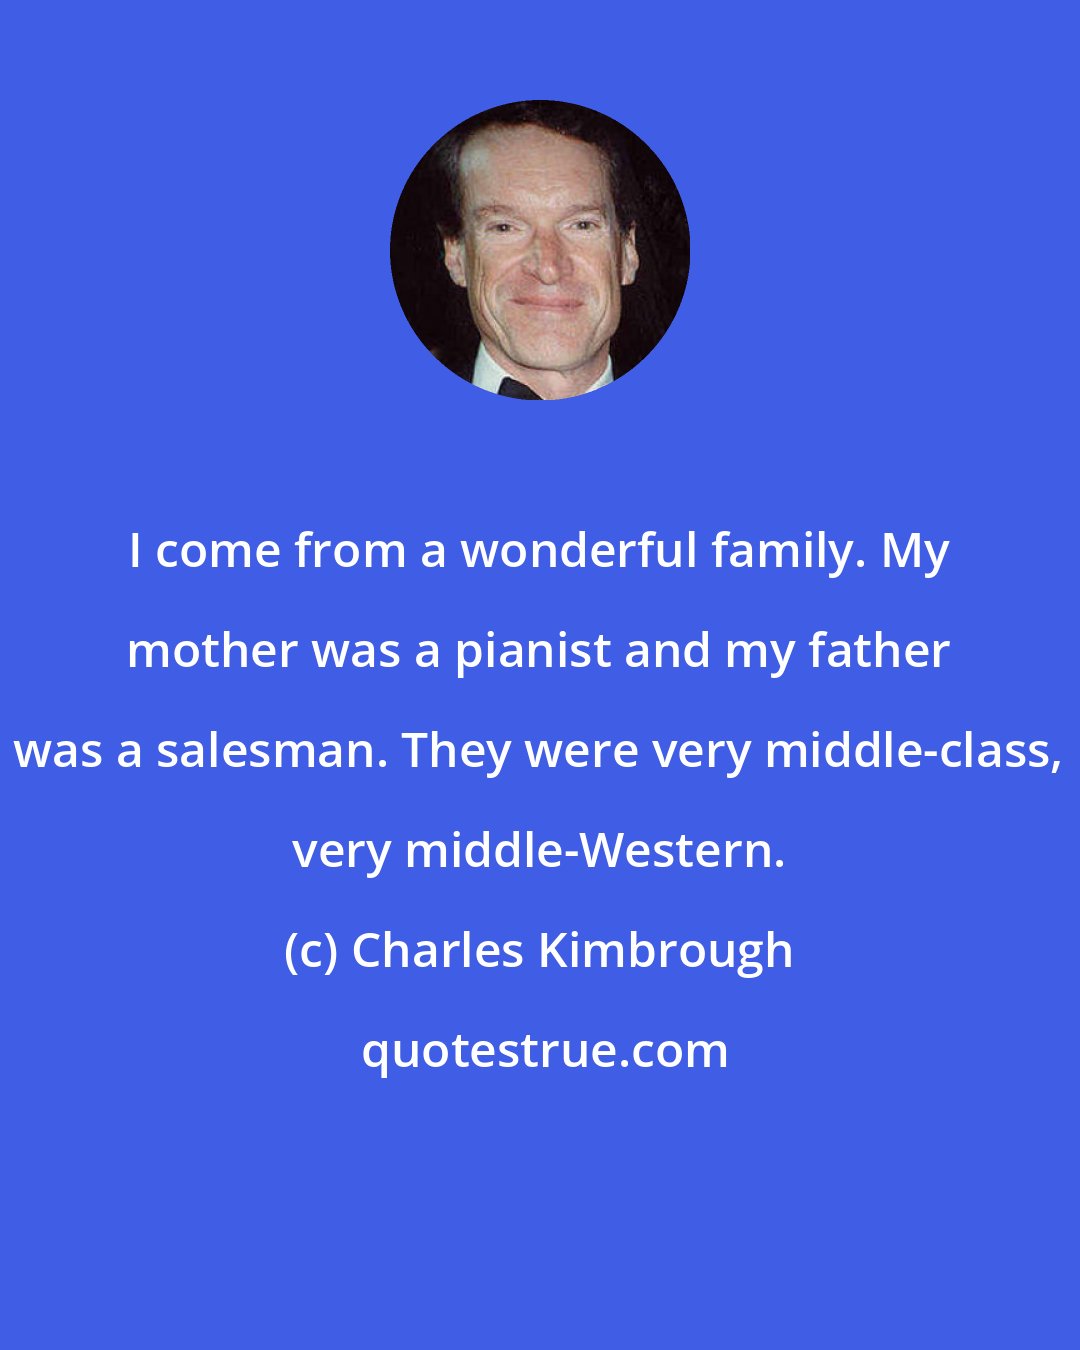 Charles Kimbrough: I come from a wonderful family. My mother was a pianist and my father was a salesman. They were very middle-class, very middle-Western.